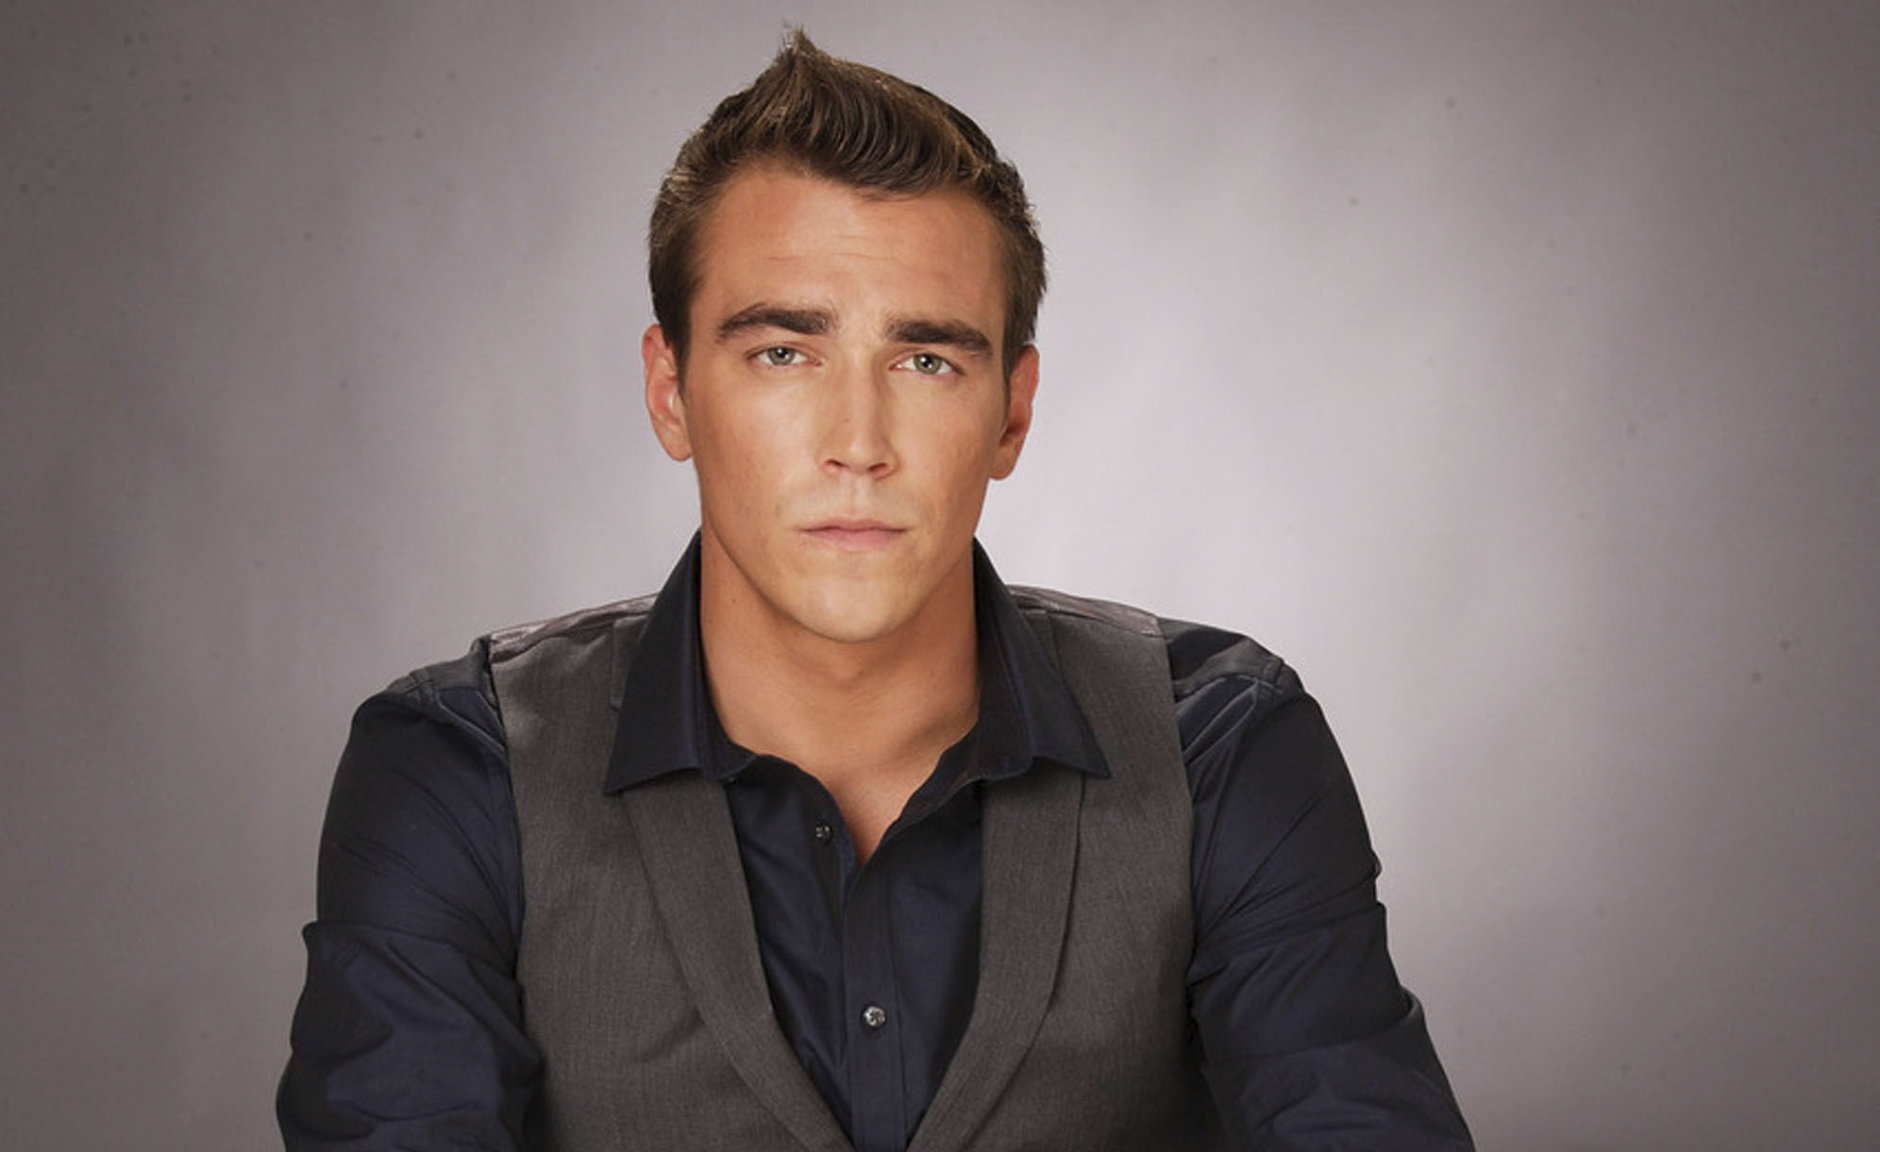 This undated photo provided by Bobby Goldstein Productions shows Clark James Gable III, host of the reality TV show "Cheaters" and grandson of late Academy Award-winning actor Clark Gable. The Dallas County Southwestern Institute of Forensic Science says the 30-year-old Gable died Friday, Feb. 22, 2019, at a Dallas hospital. The medical examiner's office said the cause and manner of death were pending Tuesday. The death was not considered suspicious. (Courtesy of Bobby Goldstein Productions via AP)